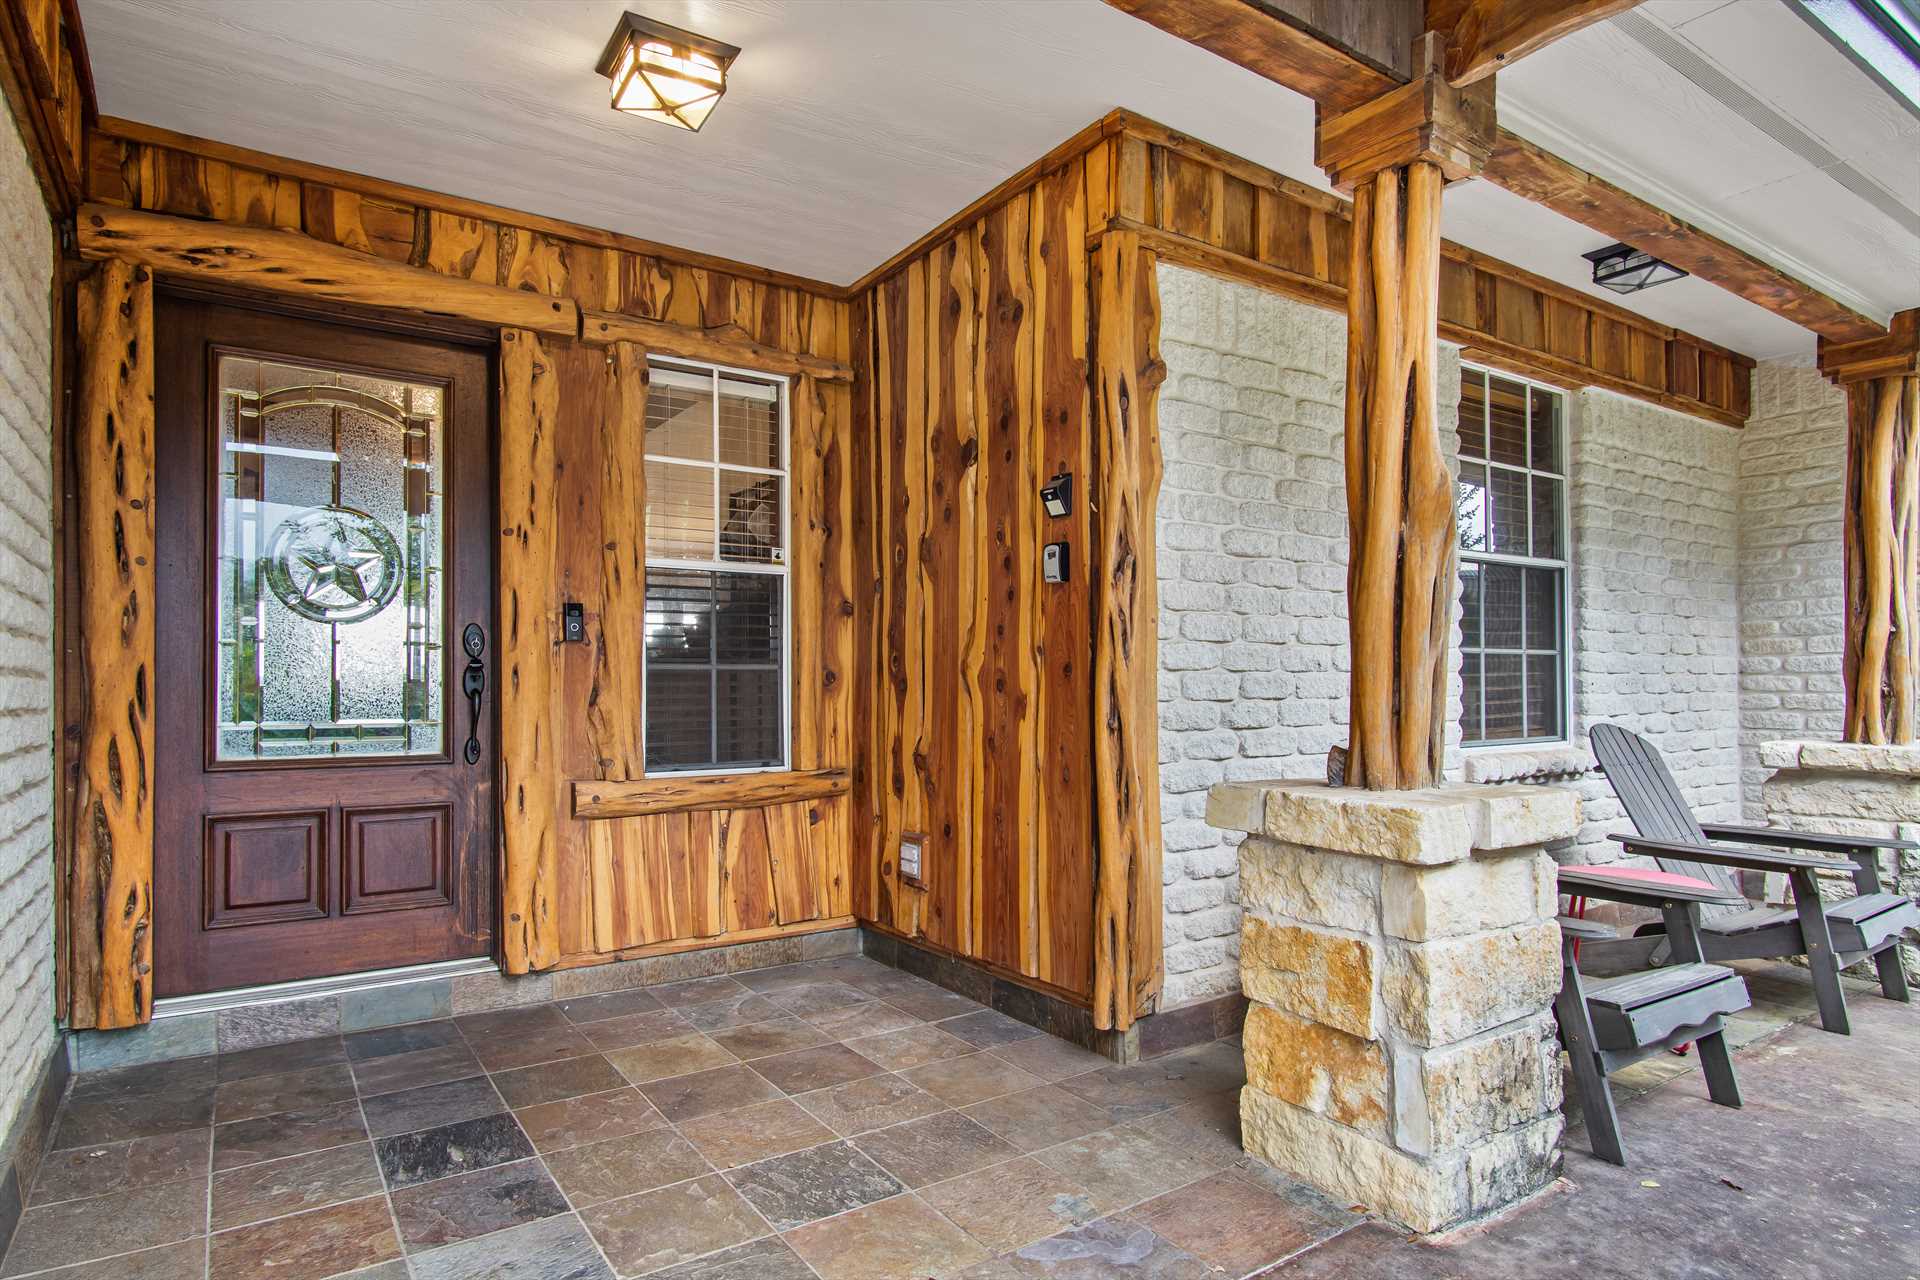                                                 Bold and rustic stone and woodwork construction give the Retreat a regal and authentic ranch-like look.